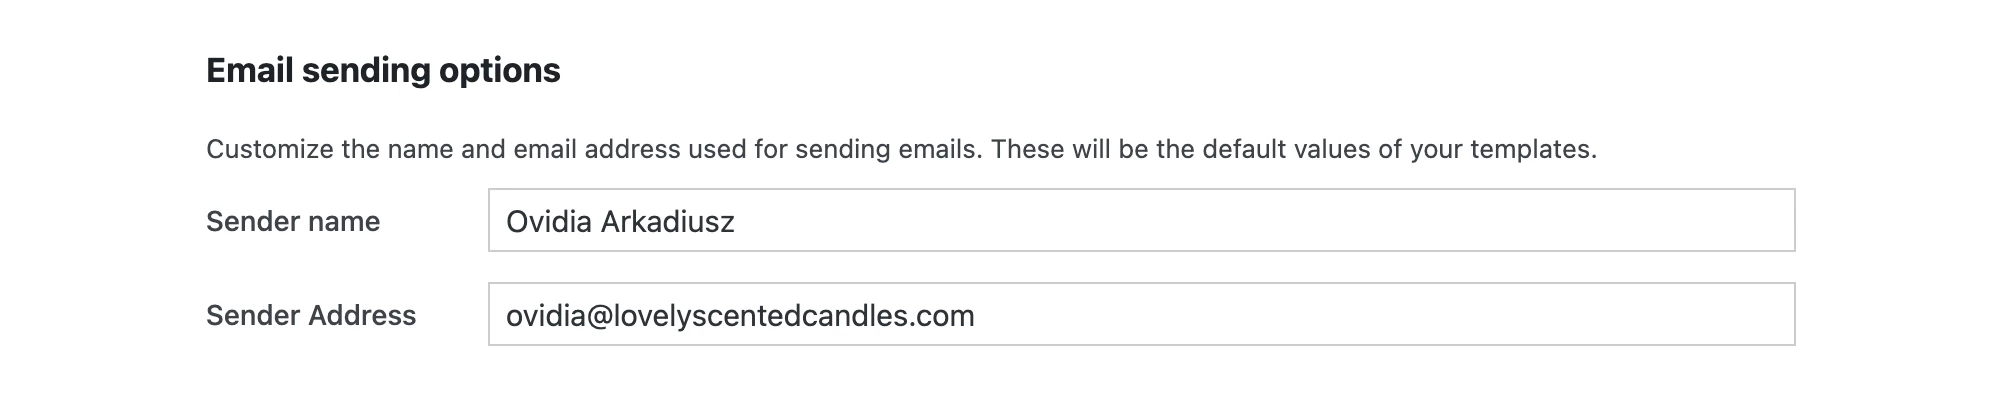 Email sending options